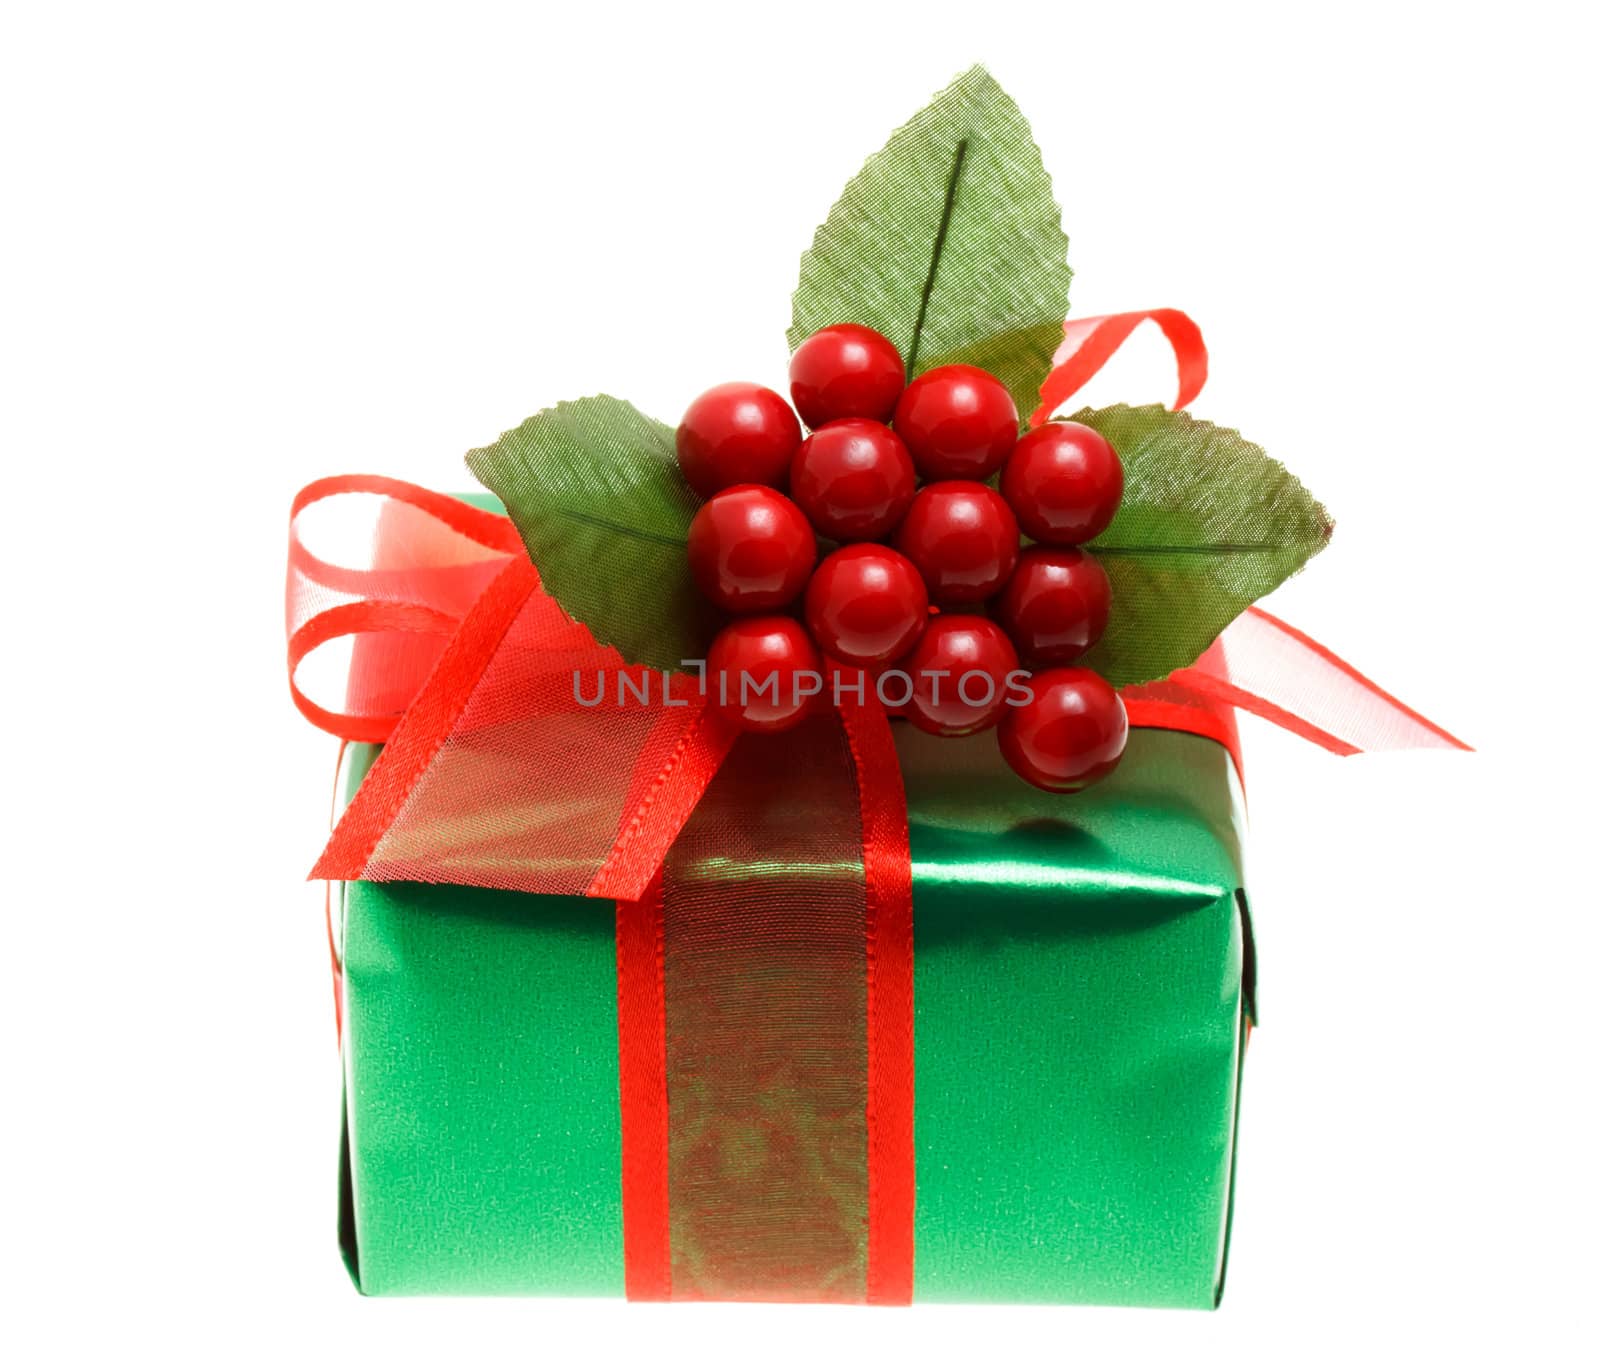 Green Christmas gift box isolated on white background